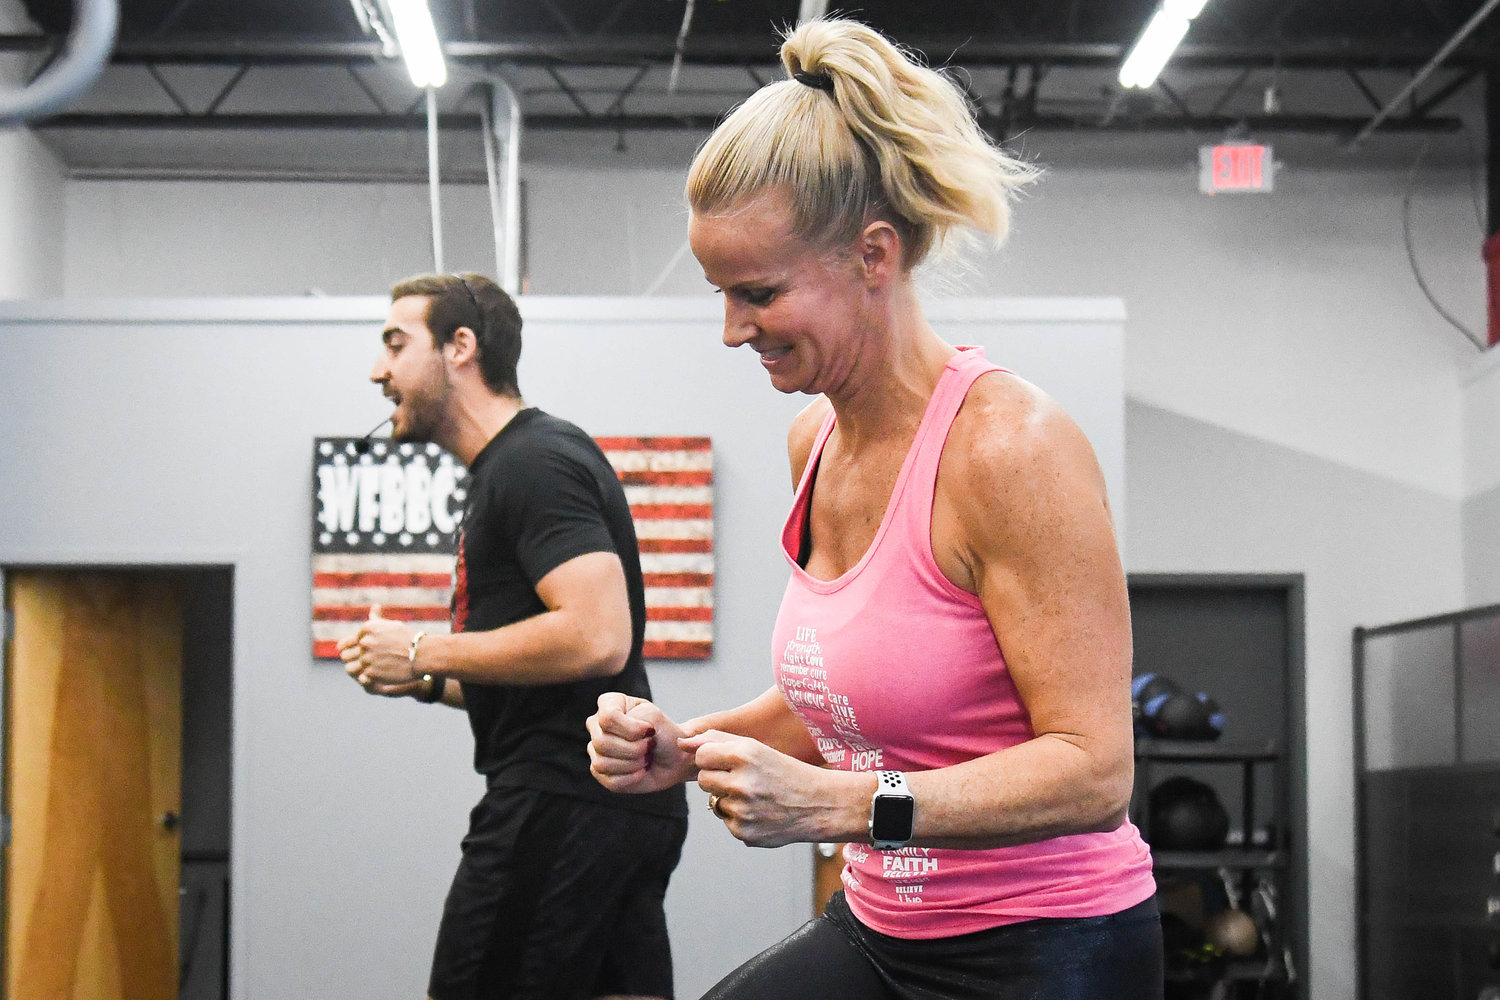 Lisa Briggs and Dominic Caccioppoli lead a fitness group on Monday, Oct. 10 at Whitesboro Fit Body Boot Camp. The gym is raising money for breast cancer and honoring all of the women in the gym that have battled breast cancer.